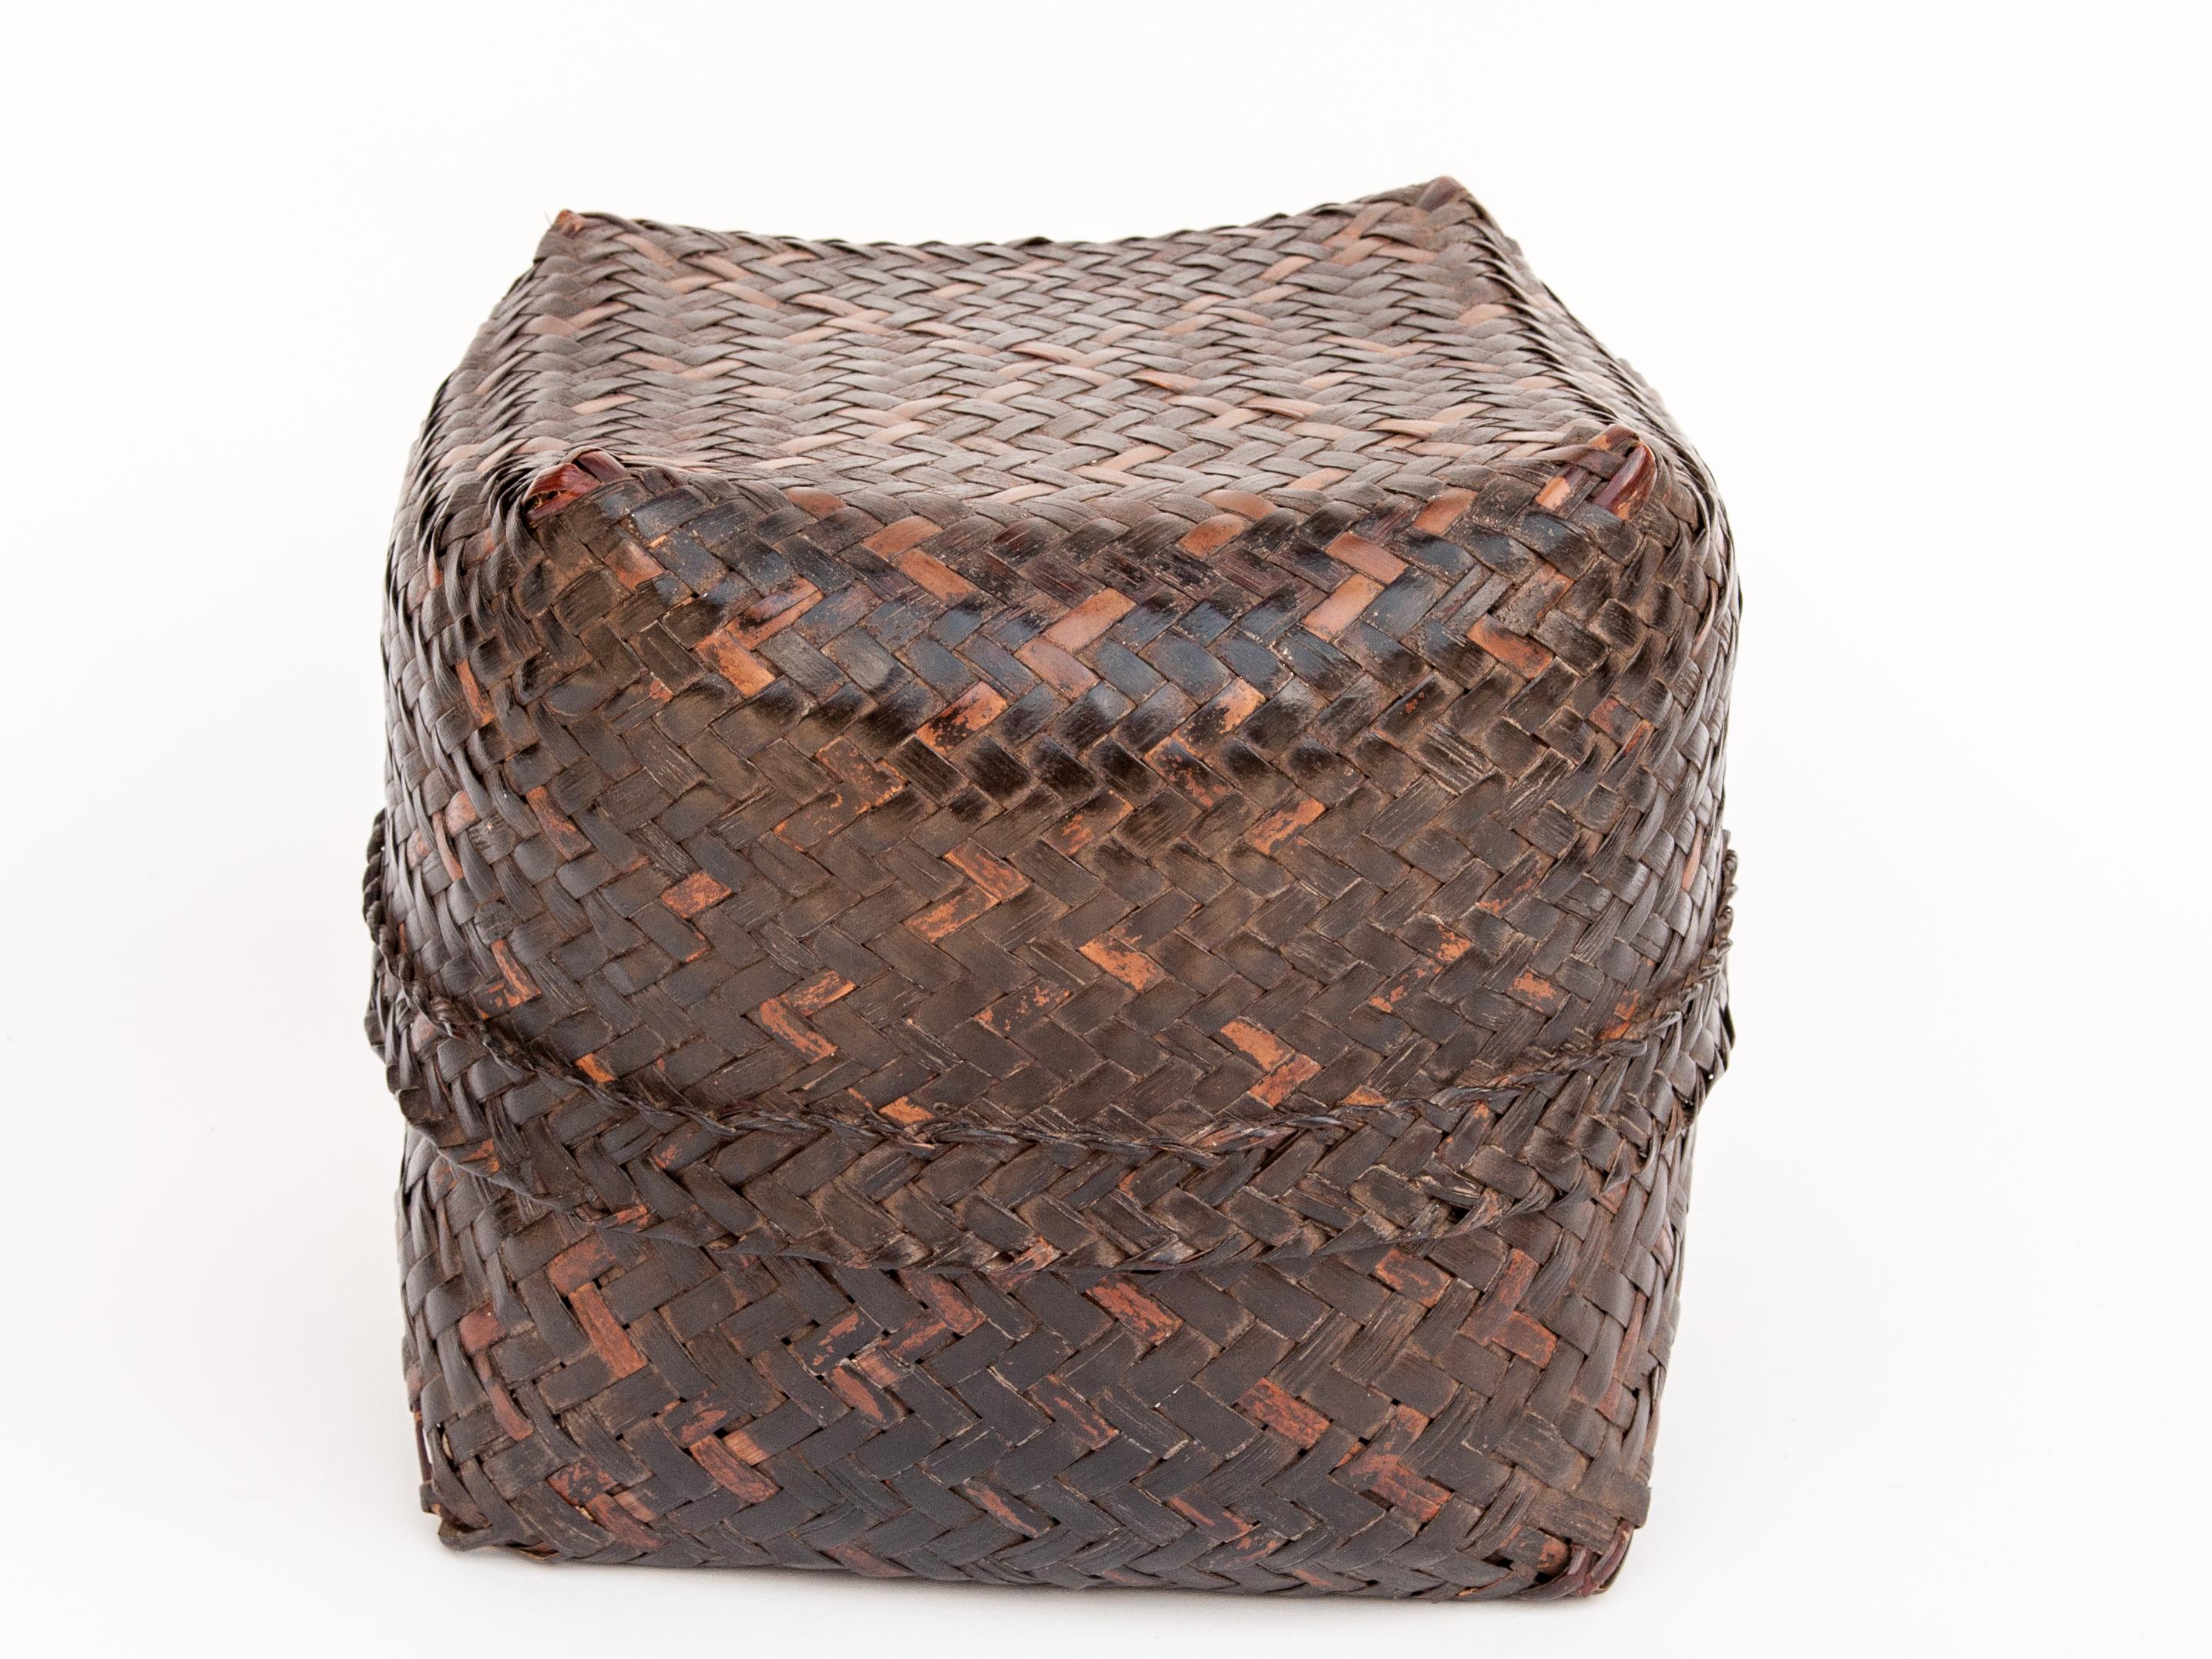 Vintage bamboo storage box basket with lid from Lombok, Indonesia, mid to late 20th century.
This sturdy bamboo basket was fashioned by hand and used to store household items and keepsakes. It is simply conceived and cleanly worked; and exhibits a